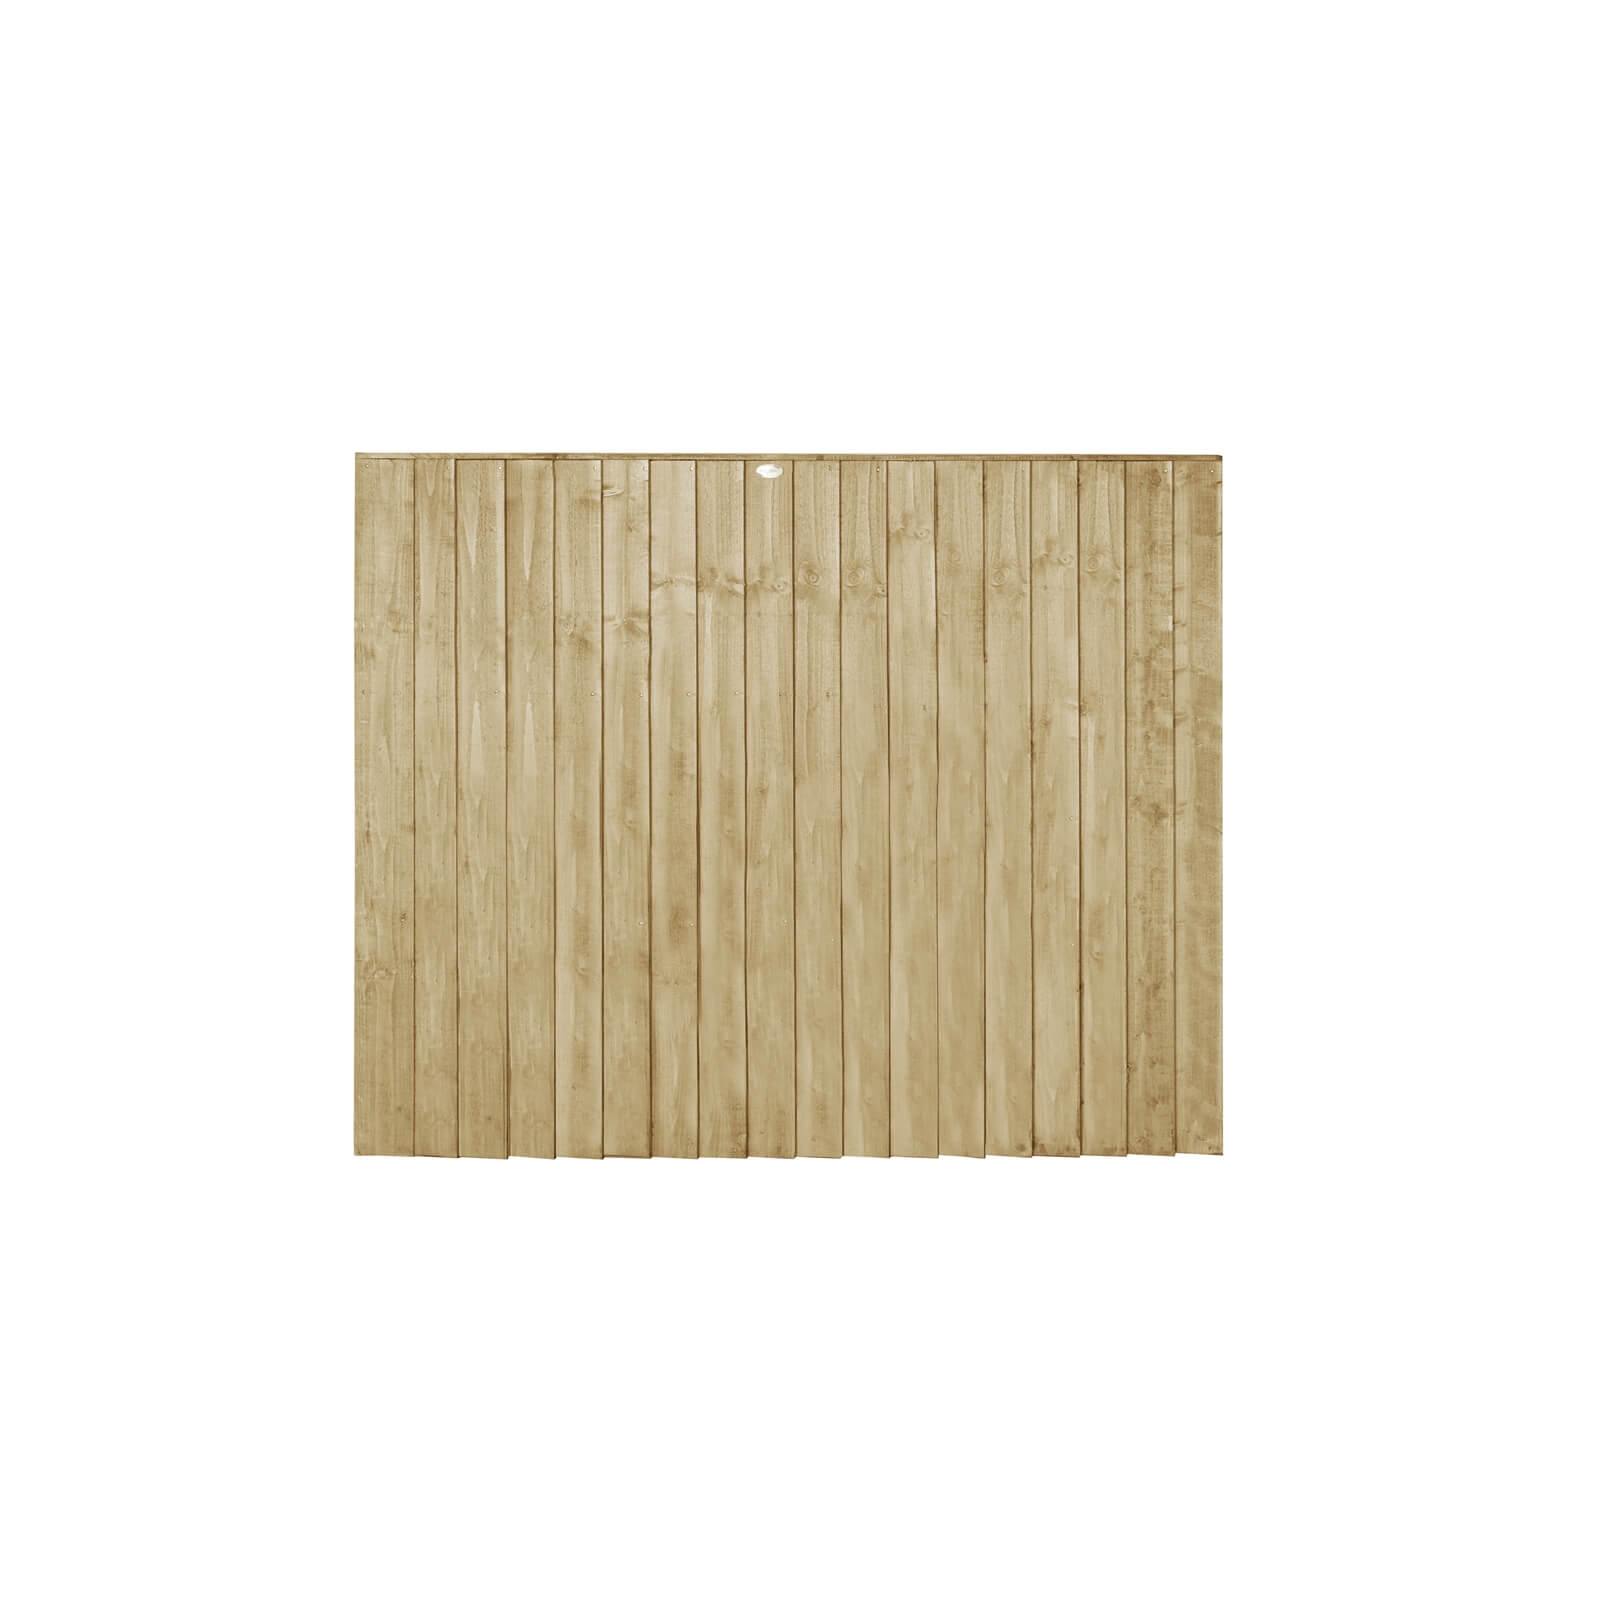 6ft x 5ft (1.83m x 1.54m) Pressure Treated Featheredge Fence Panel - Pack of 5